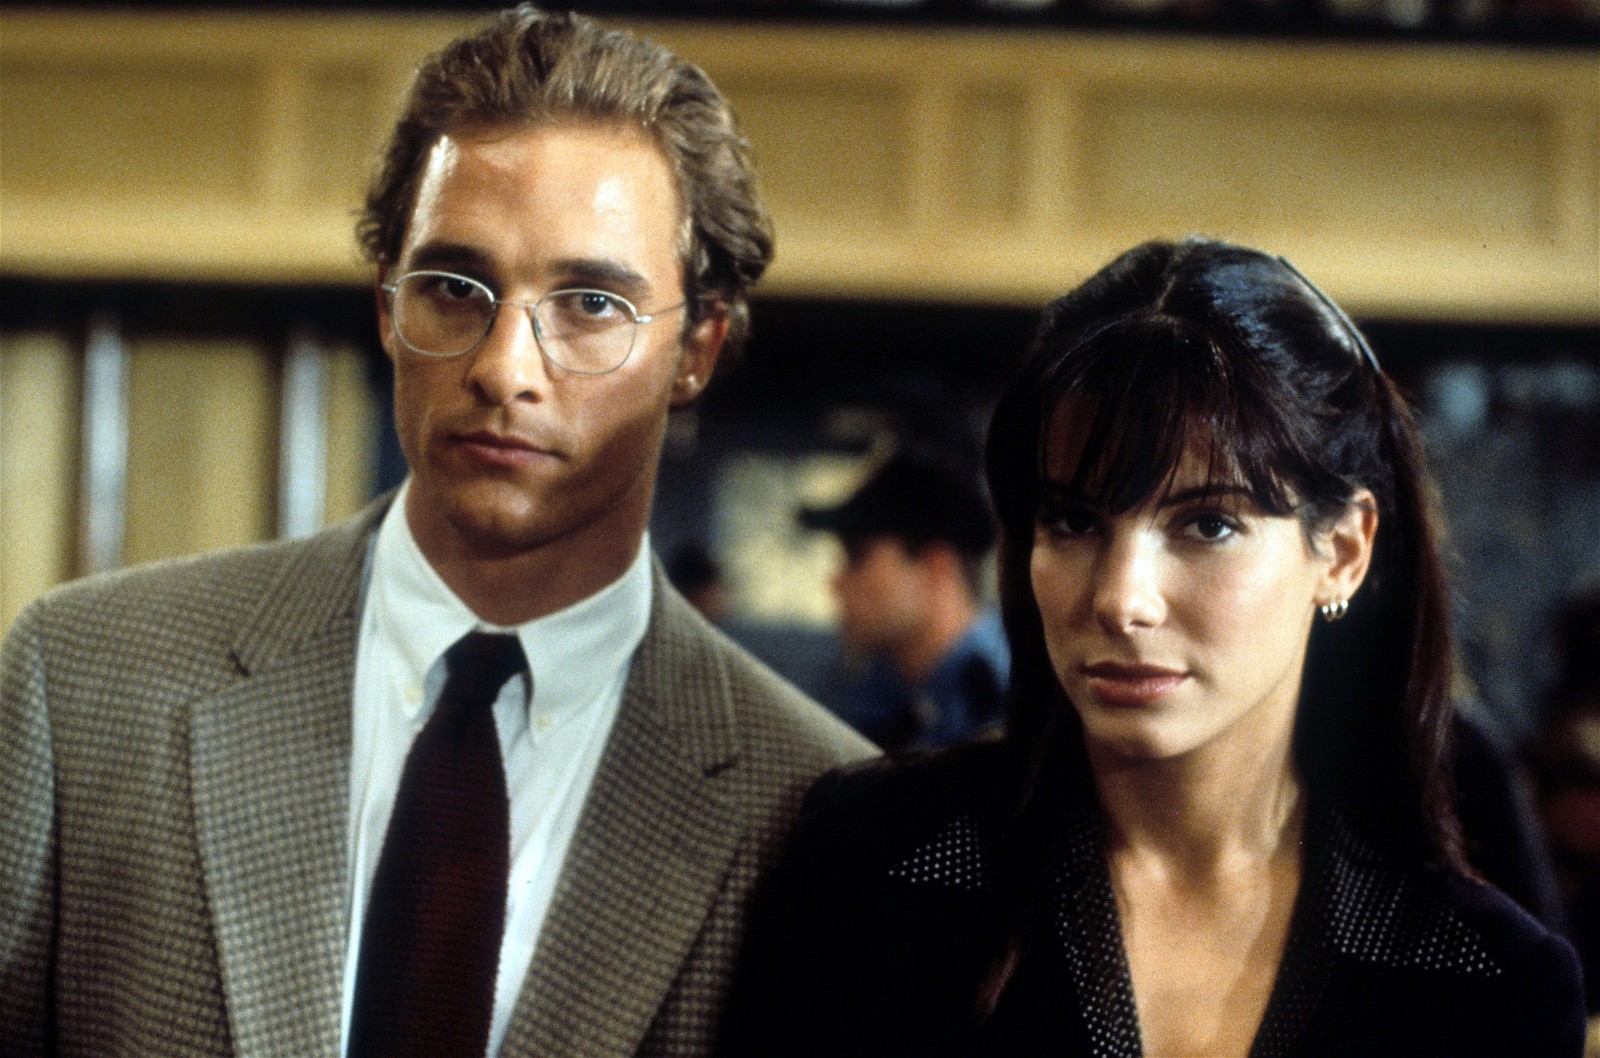 Matthew McConaughey and Sandra Bullock in a still from A Time to Kill